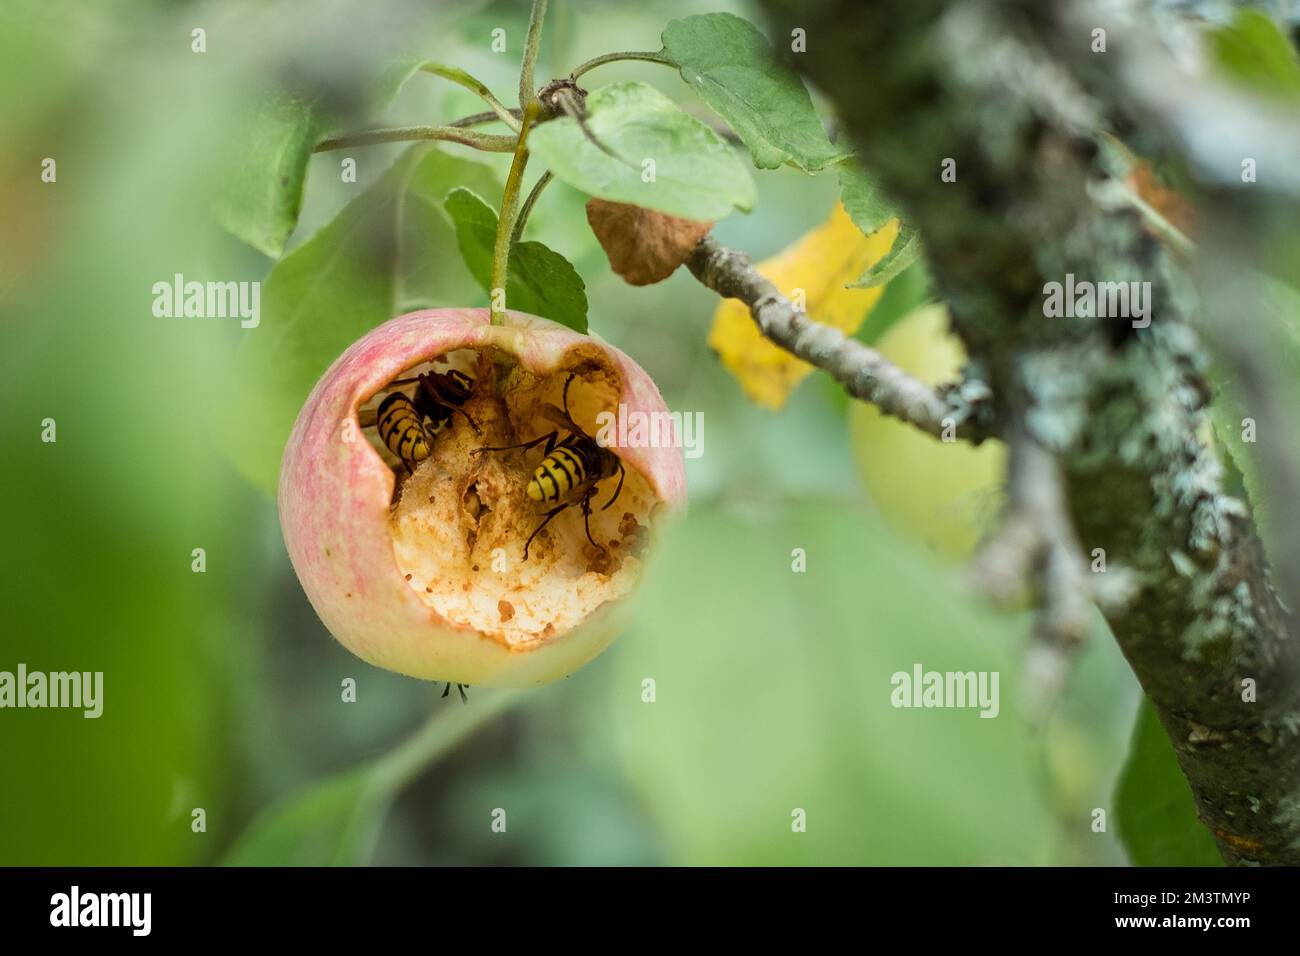 Hornets or wasps eating an apple growing on a tree. Stock Photo